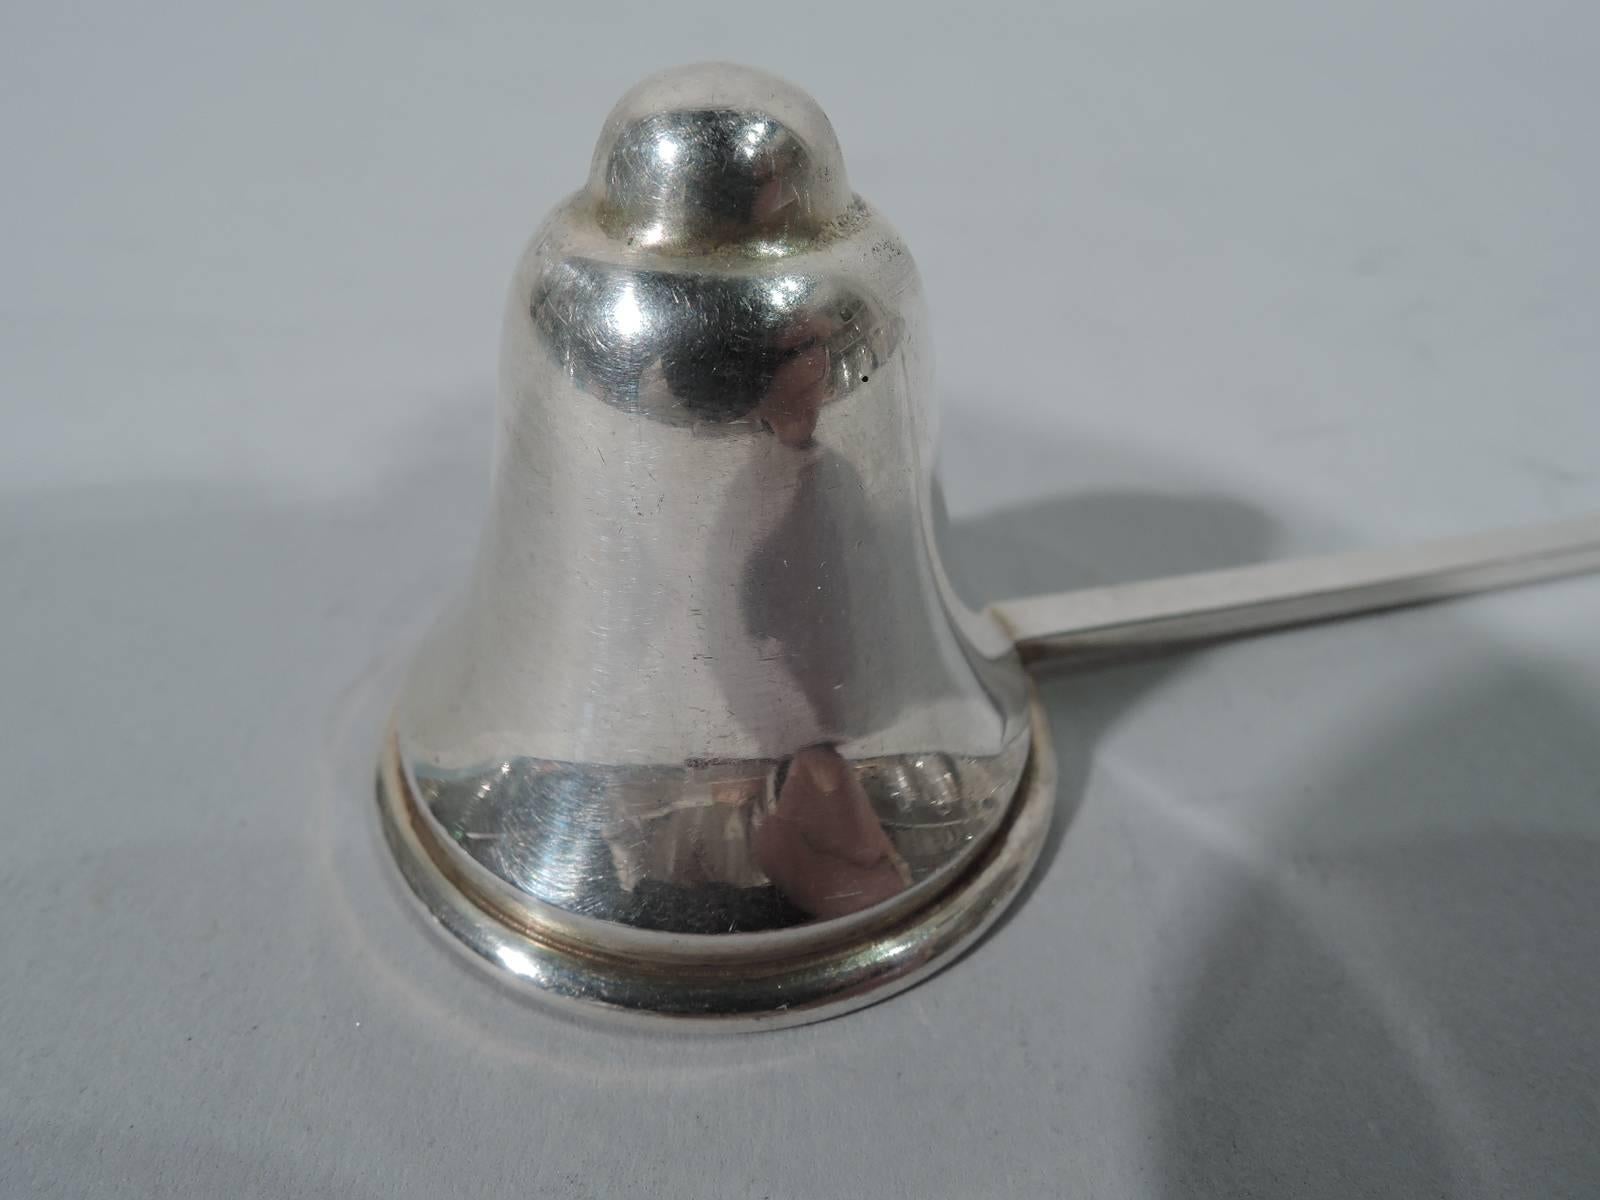 Craftsman sterling silver candle snuffer. Made by The Randahl Shop in Chicago. Domed bell bowl and straight flat handle with loop terminal. Hallmarked.